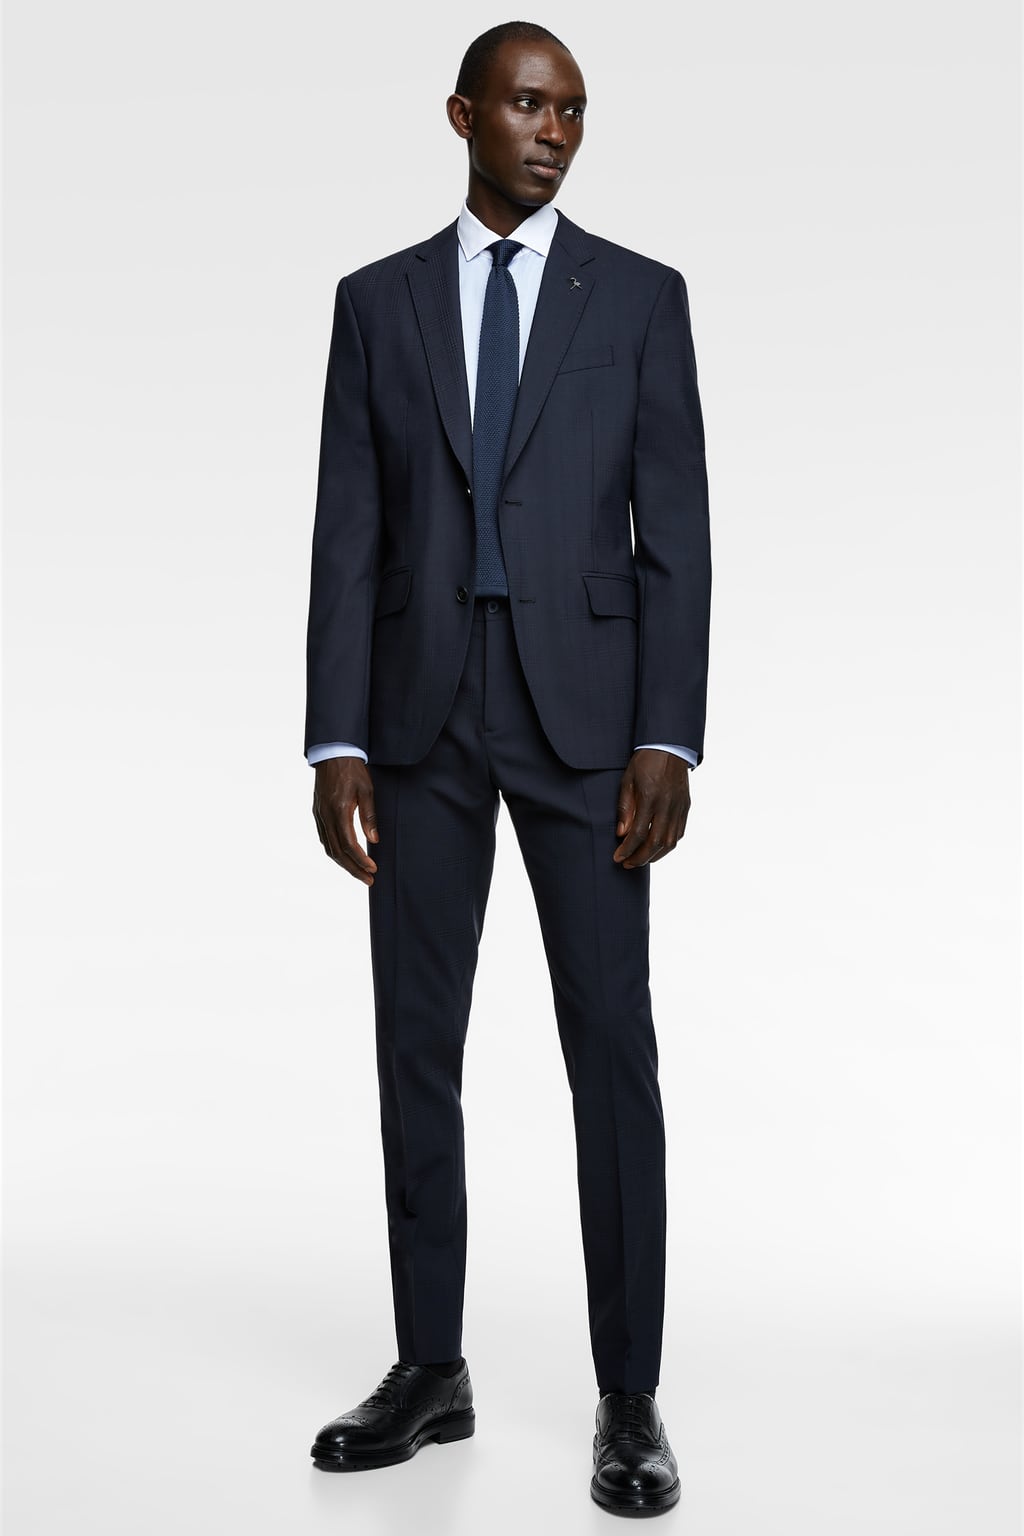 TAILORED SUITS